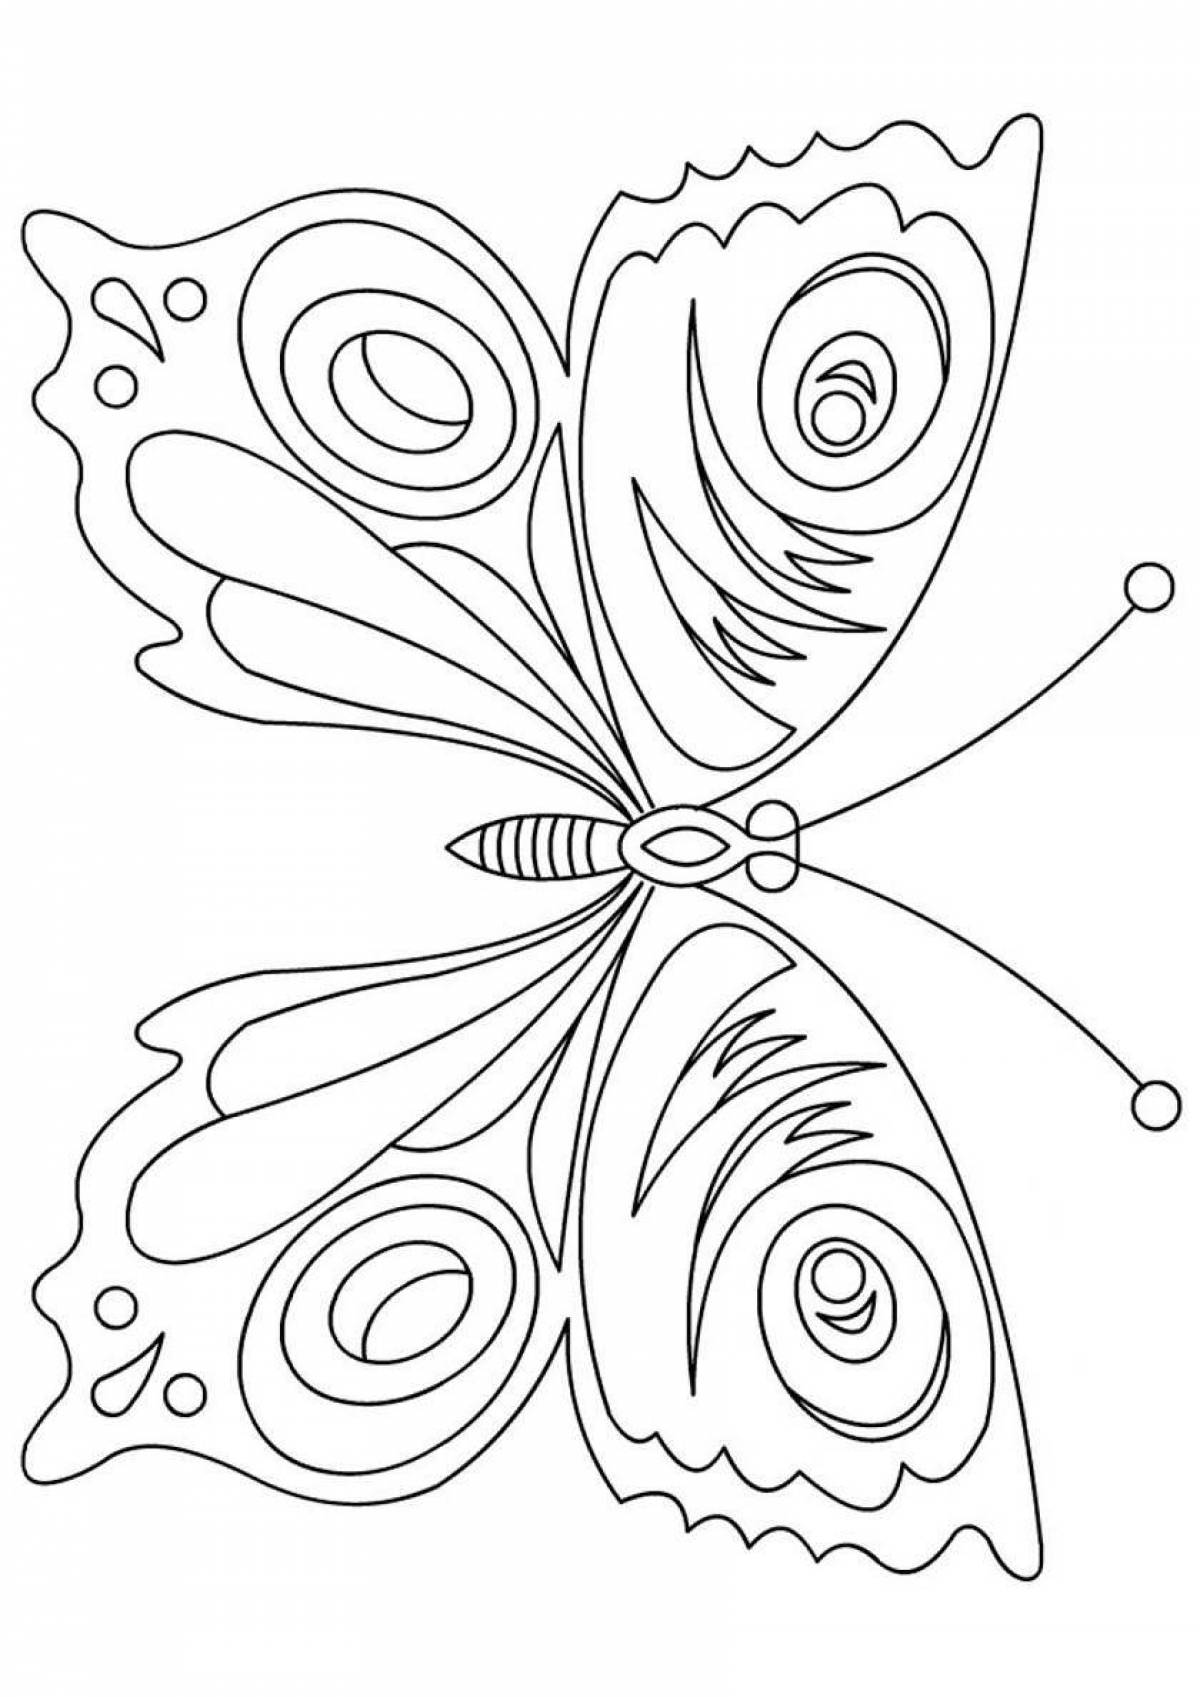 Great coloring book peacock butterfly